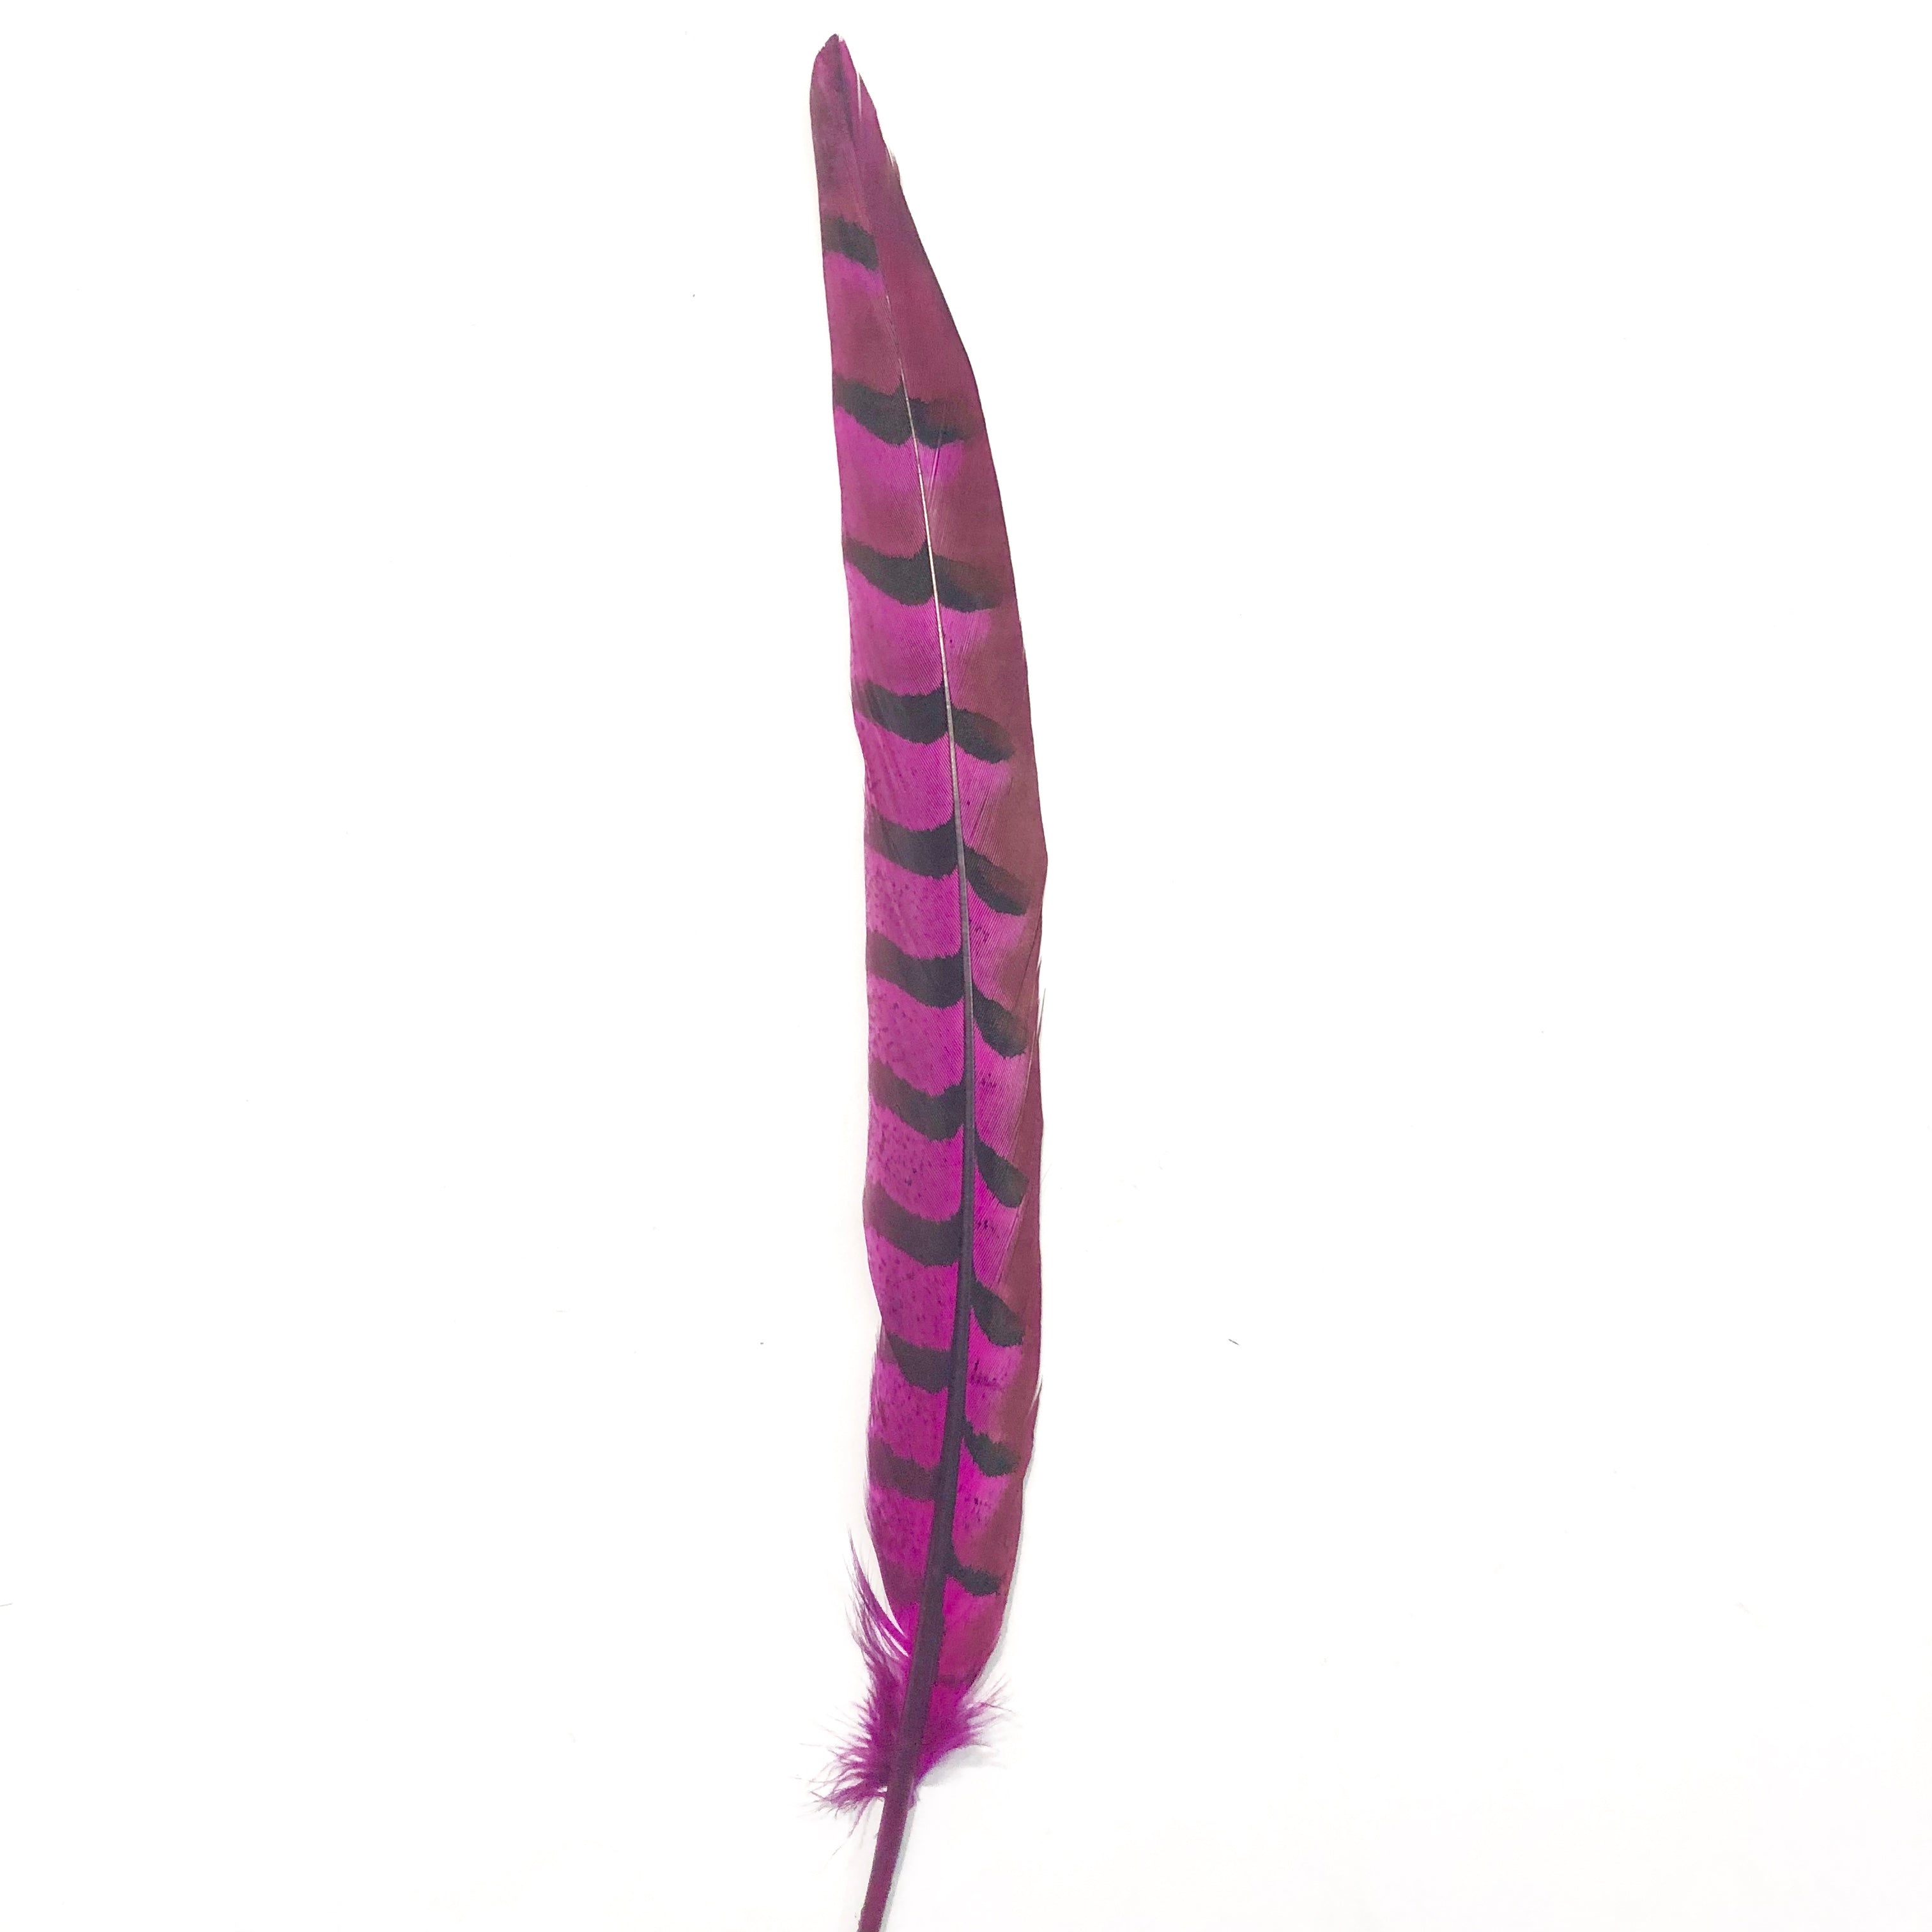 8" to 10" Reeves Pheasant Tail Feather - Cerise